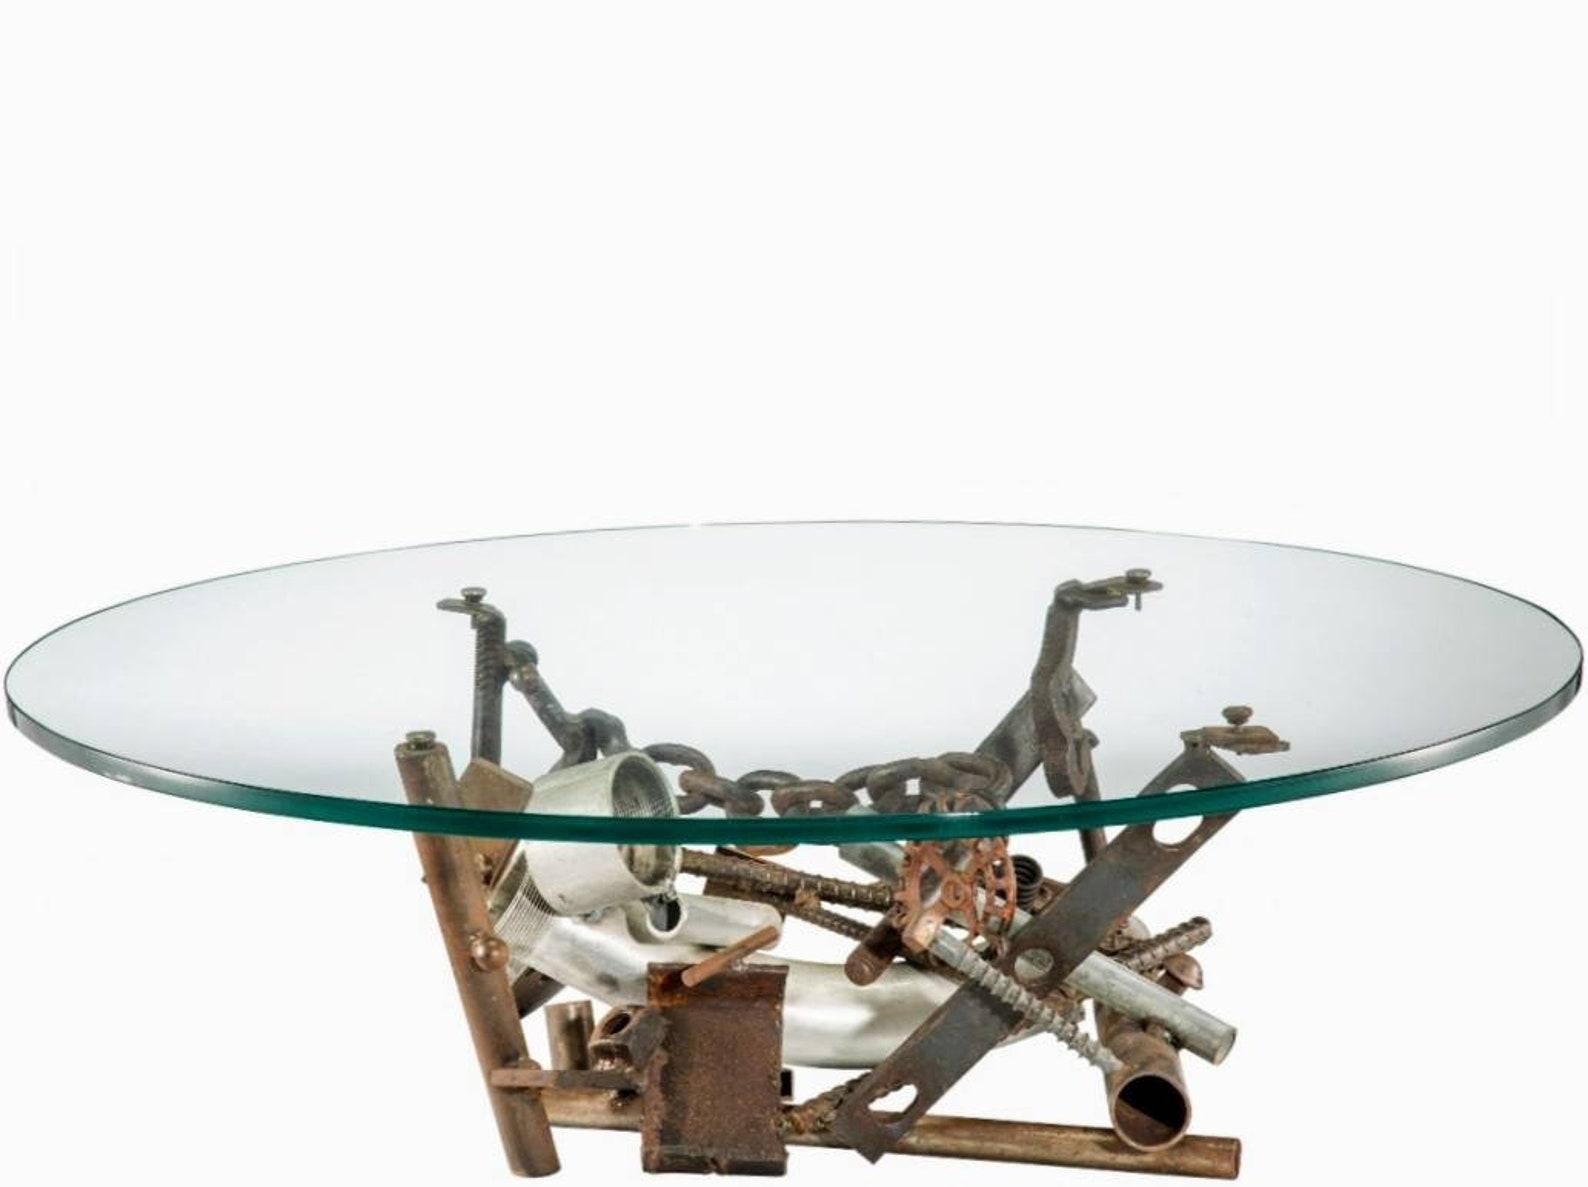 An original coffee table sculpture by sought-after American artist and sculptor Bruce Gray (b. 1956; California, United States). 

Handcrafted in the late 20th / early 21st century, abstract brutalist design, with an emphasis on materials,